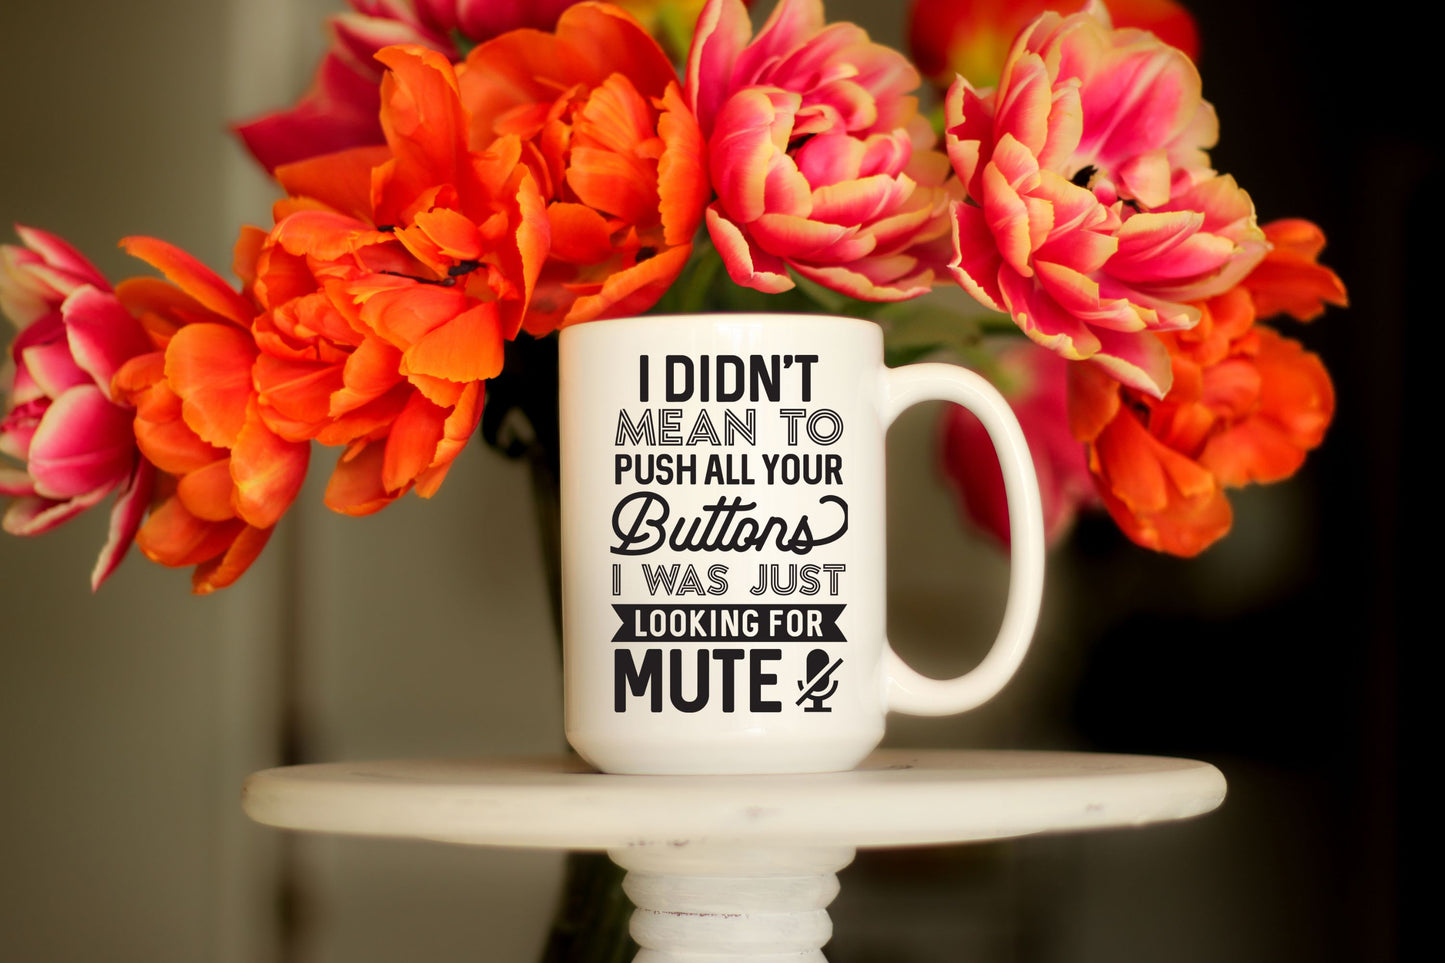 Funny 15oz Ceramic Coffee Mug "I Didn't Mean to Push All Your Buttons, I Was Just Looking for Mute"